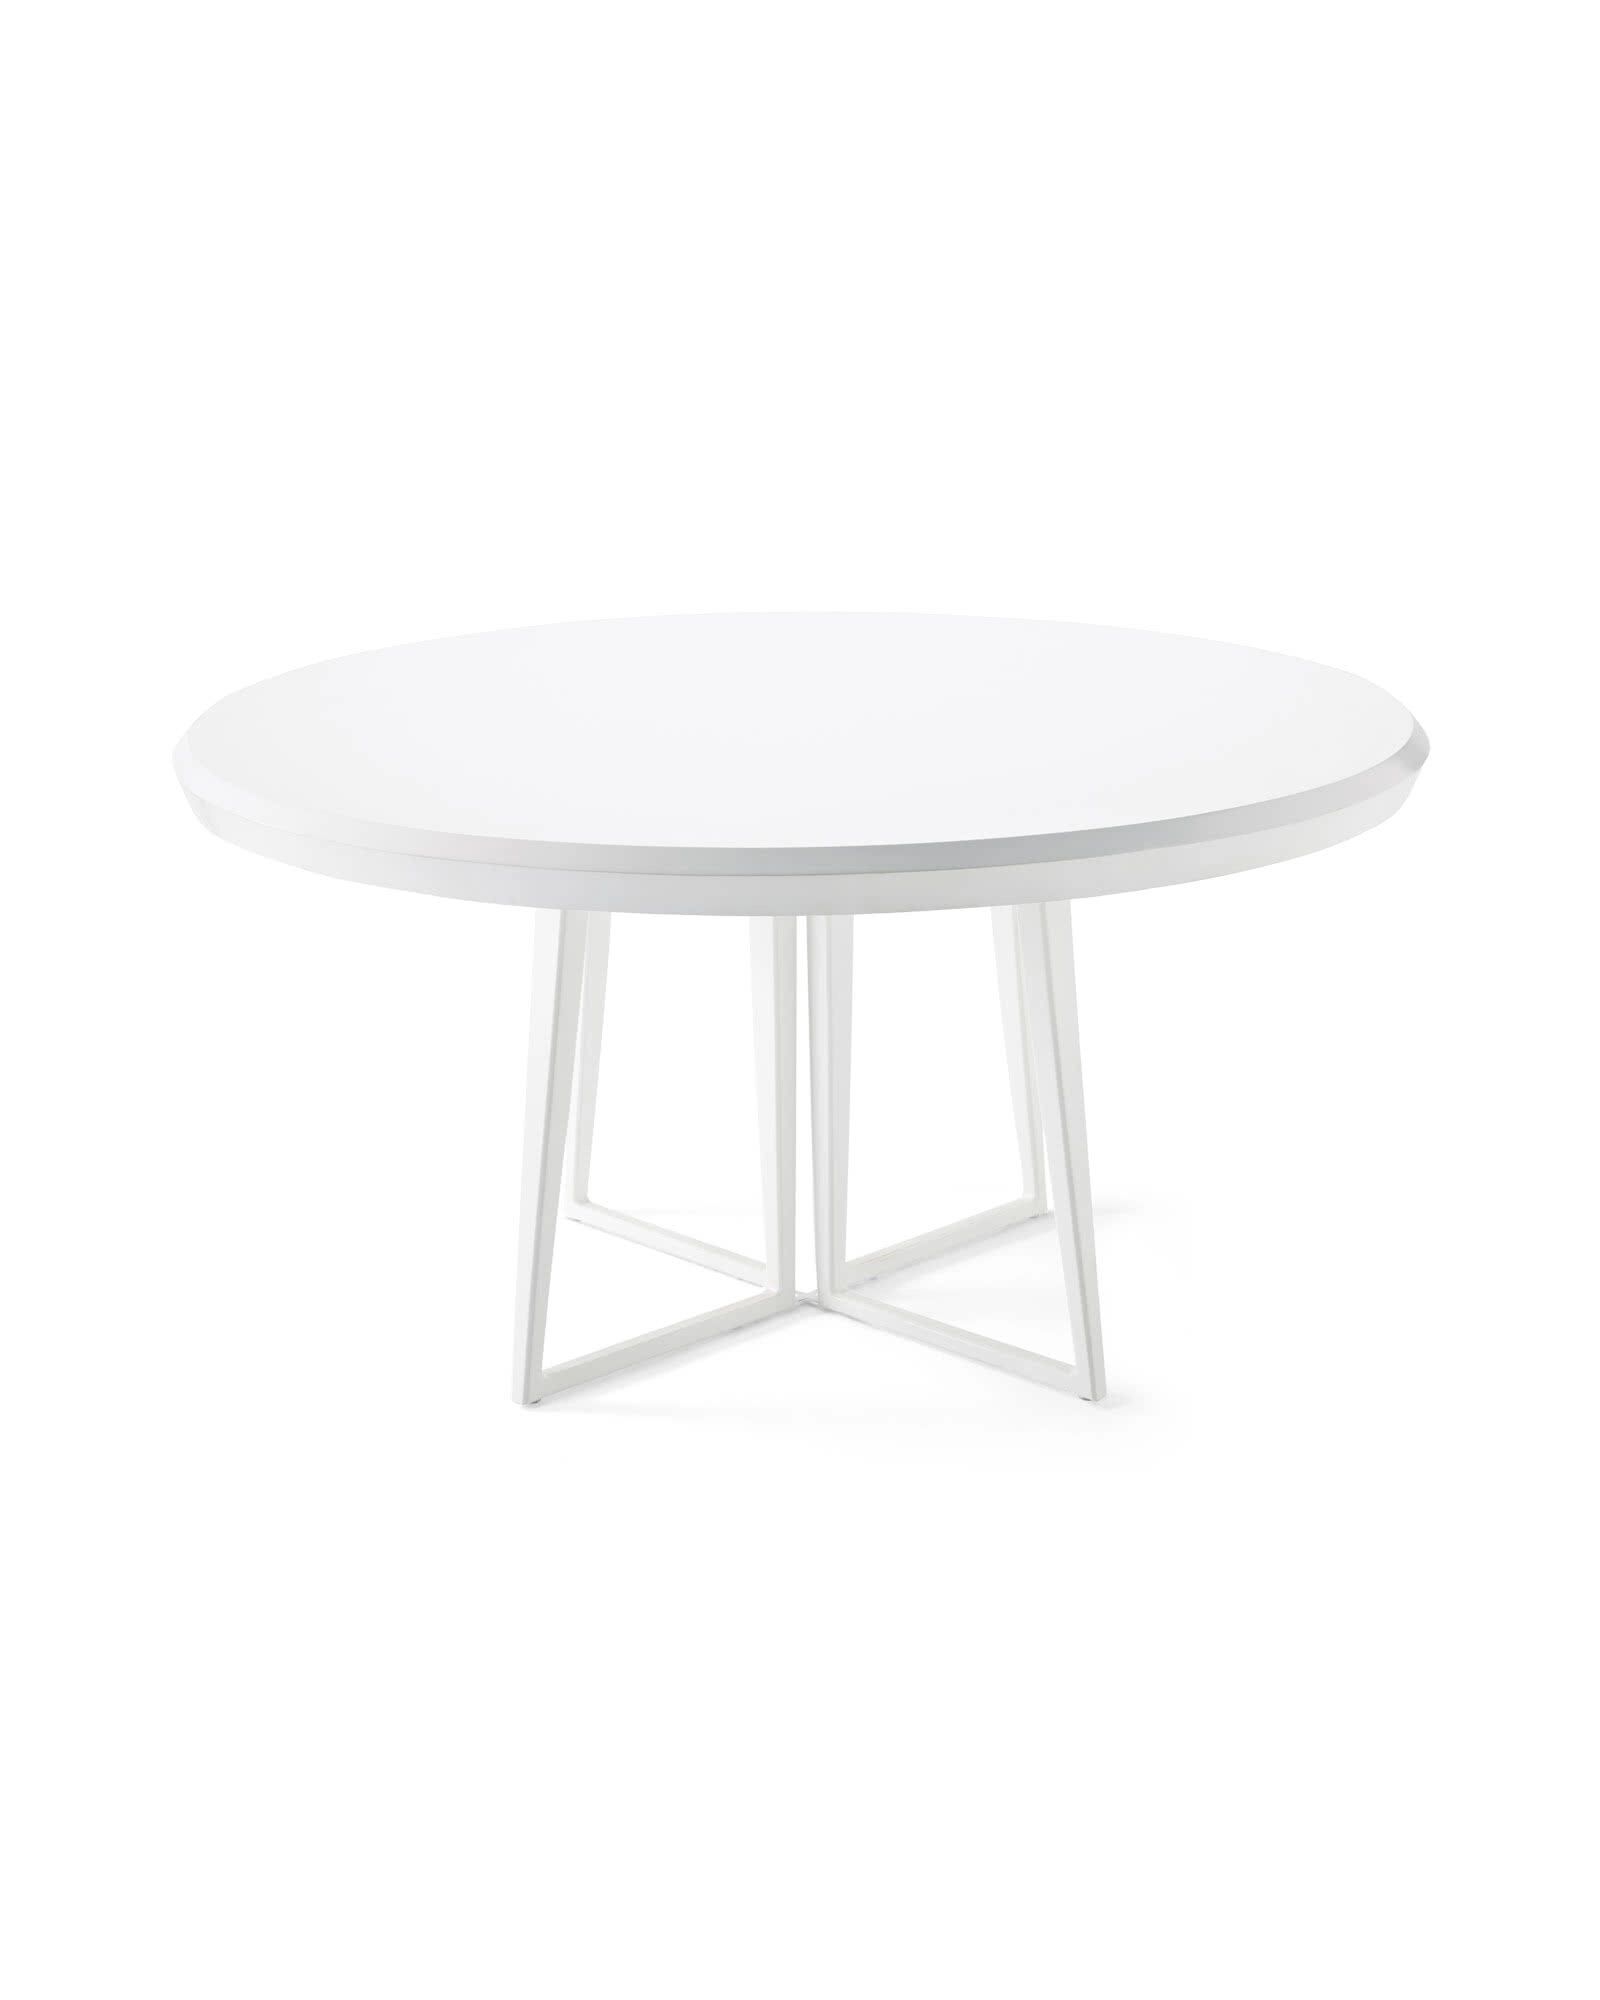 Downing Round Dining Table | Serena and Lily